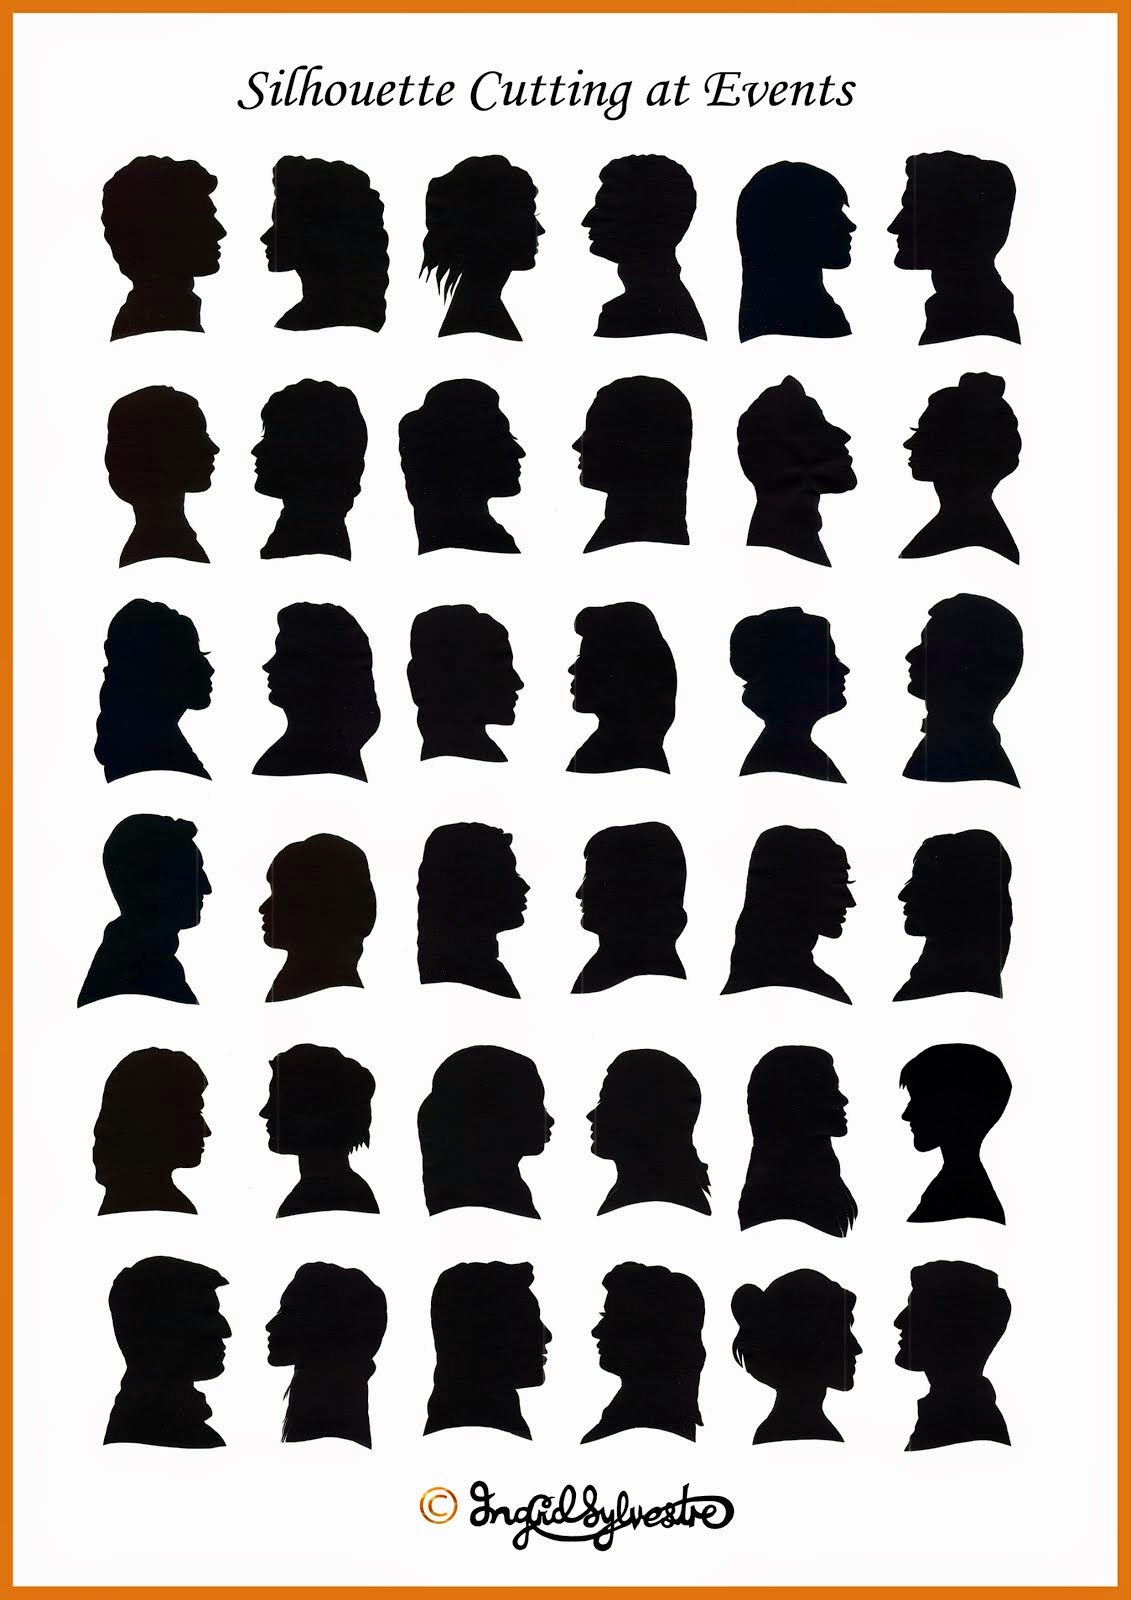 Silhouettes cut by Ingrid Sylvestre at weddings, parties, proms, corporate events